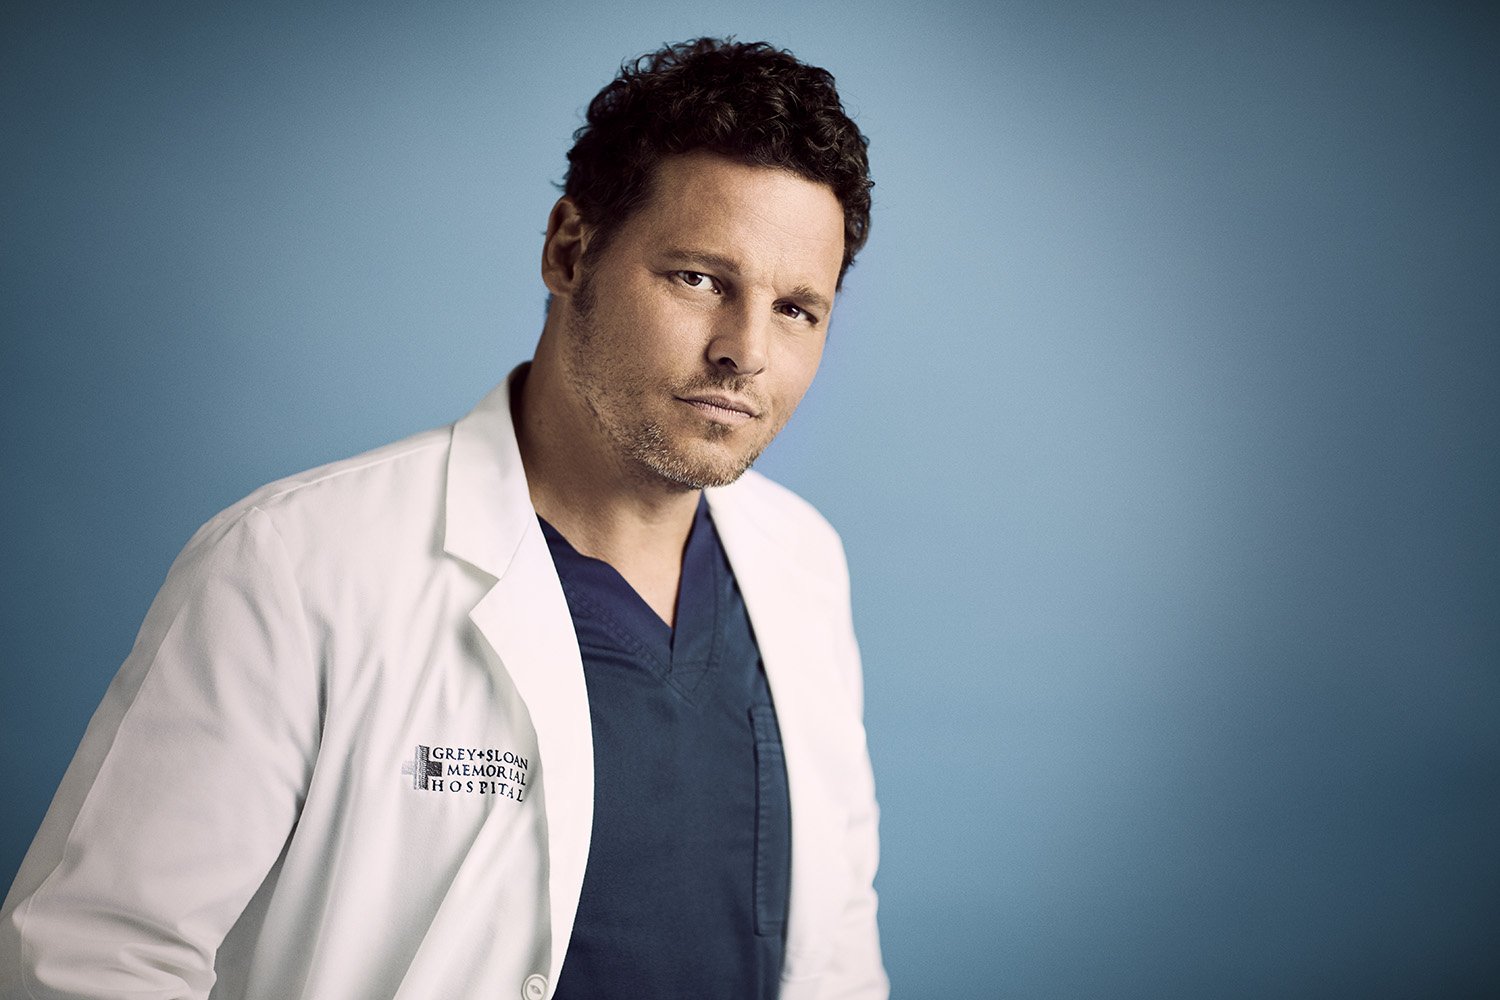 ABC's "Grey's Anatomy" star Justin Chambers as Alex Karev. | Source: Getty Images.